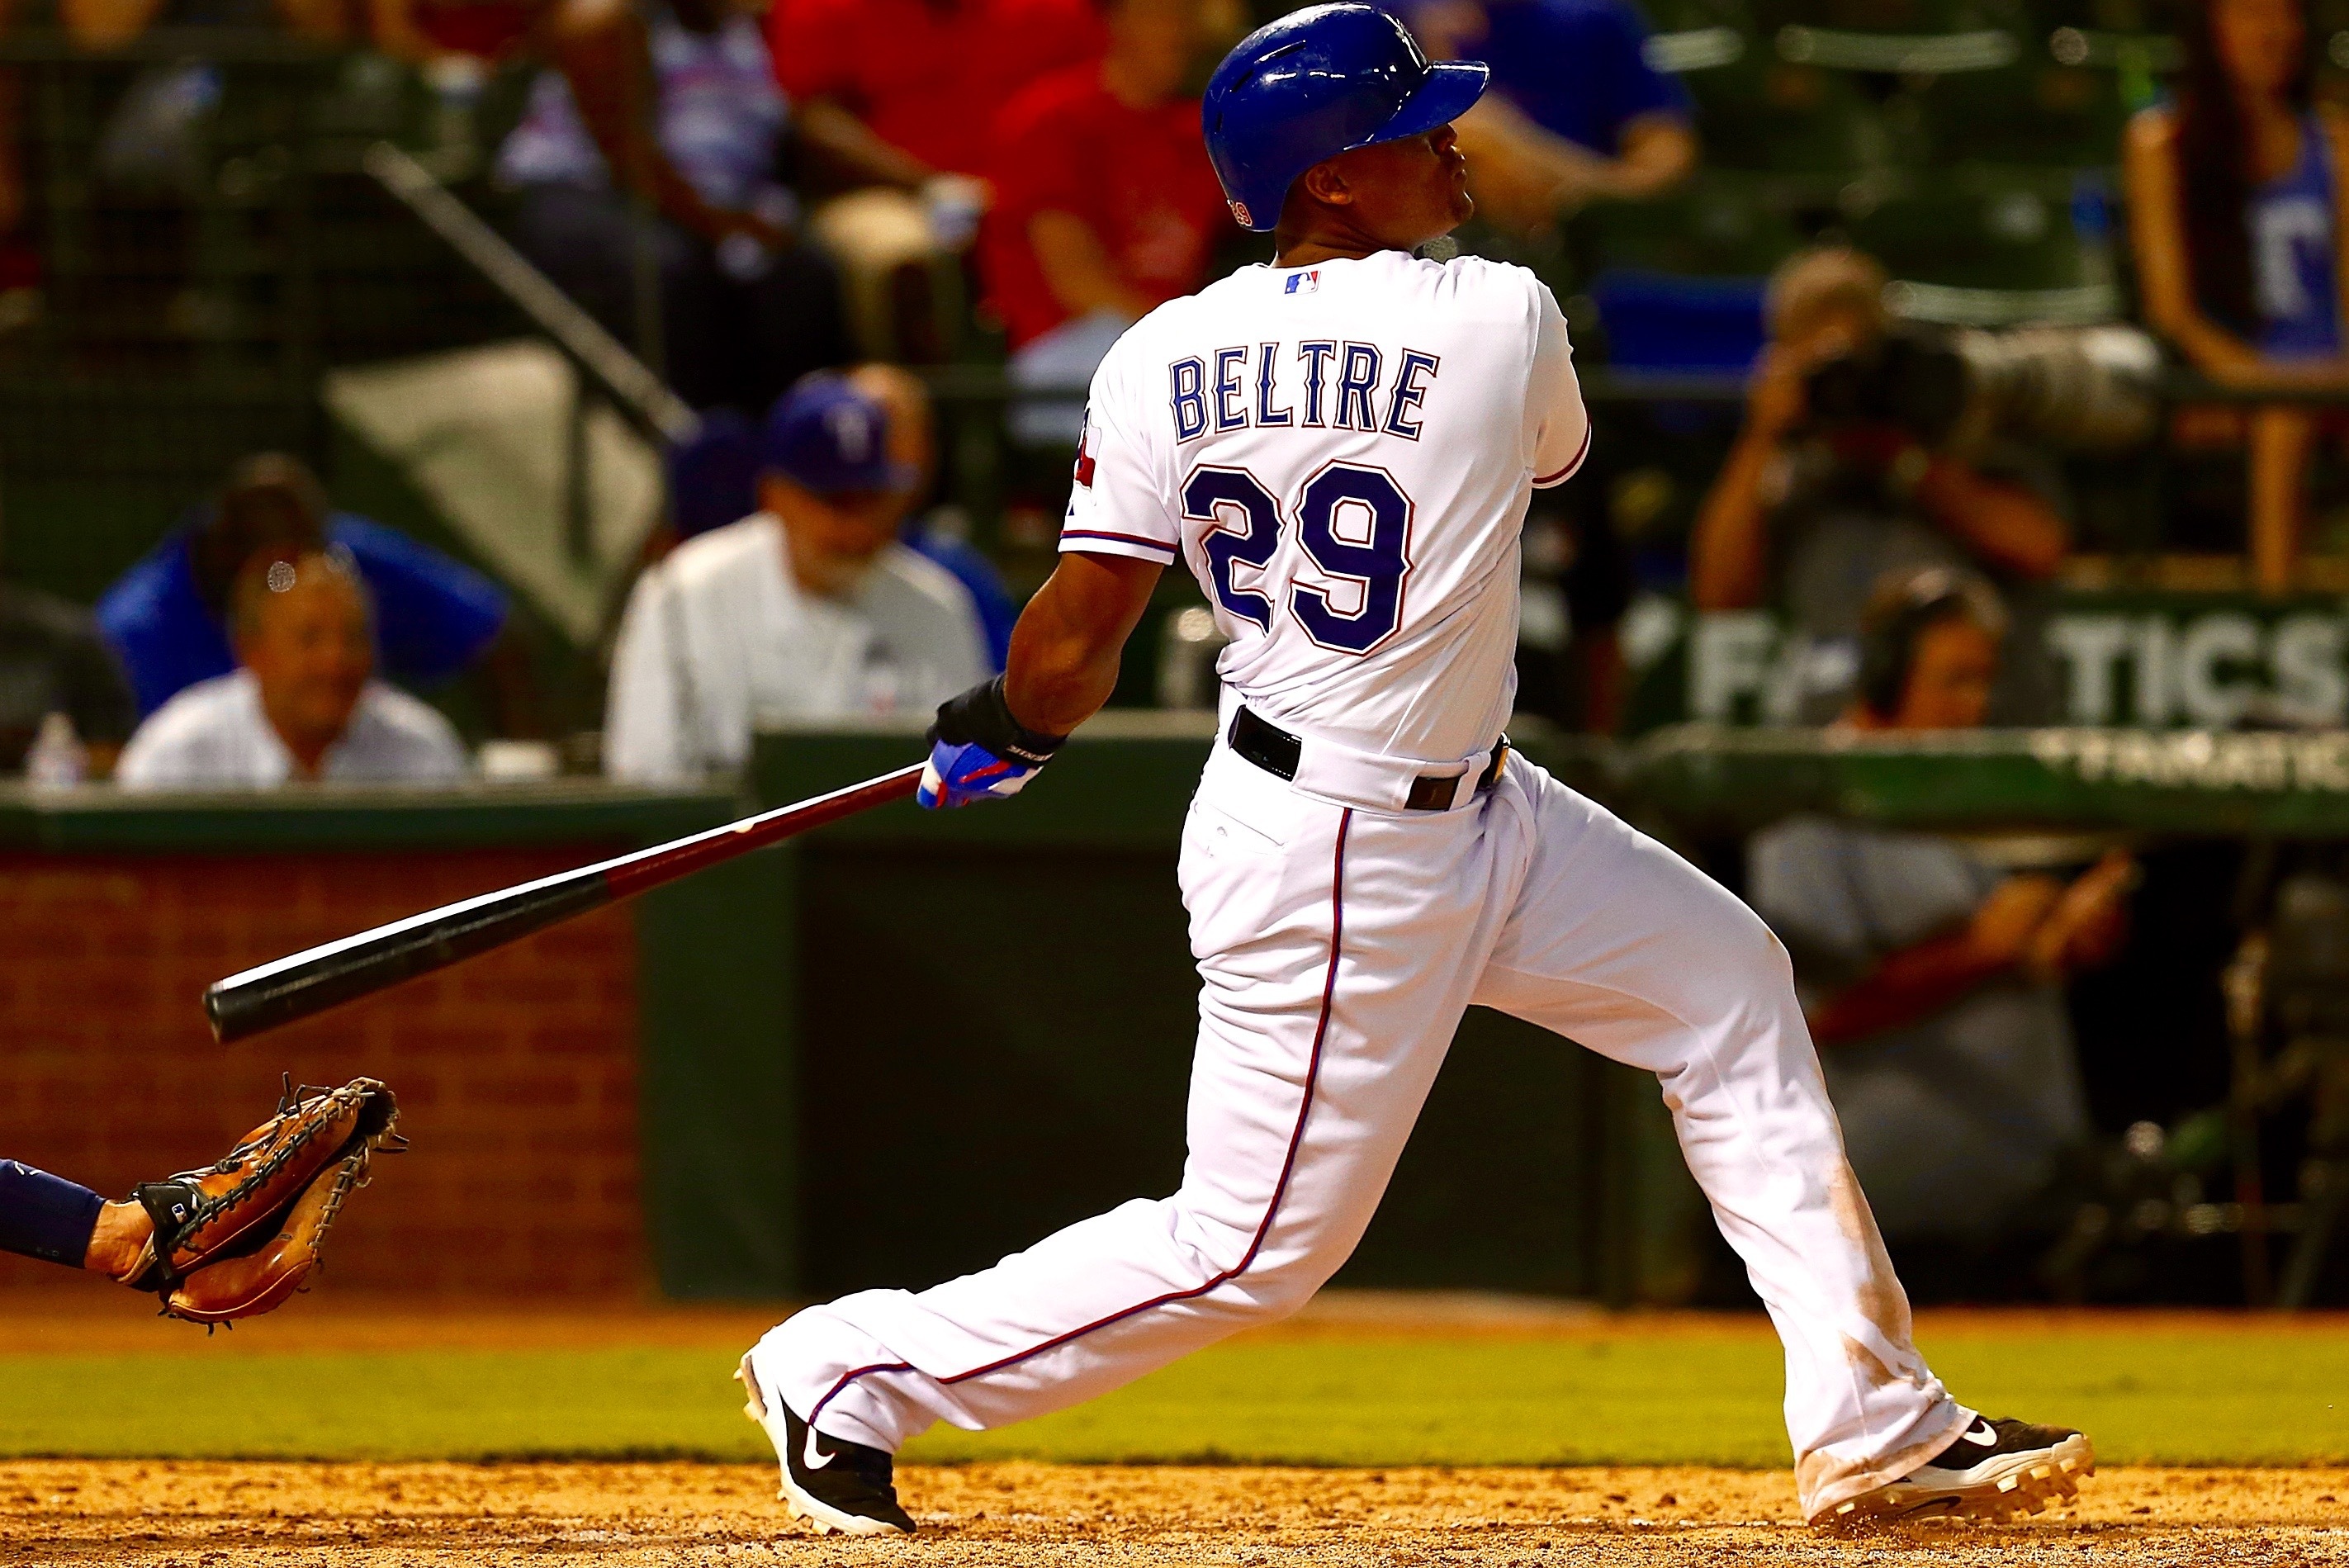 Adrian Beltre Hits for Cycle vs. Astros: Stats, Highlights and